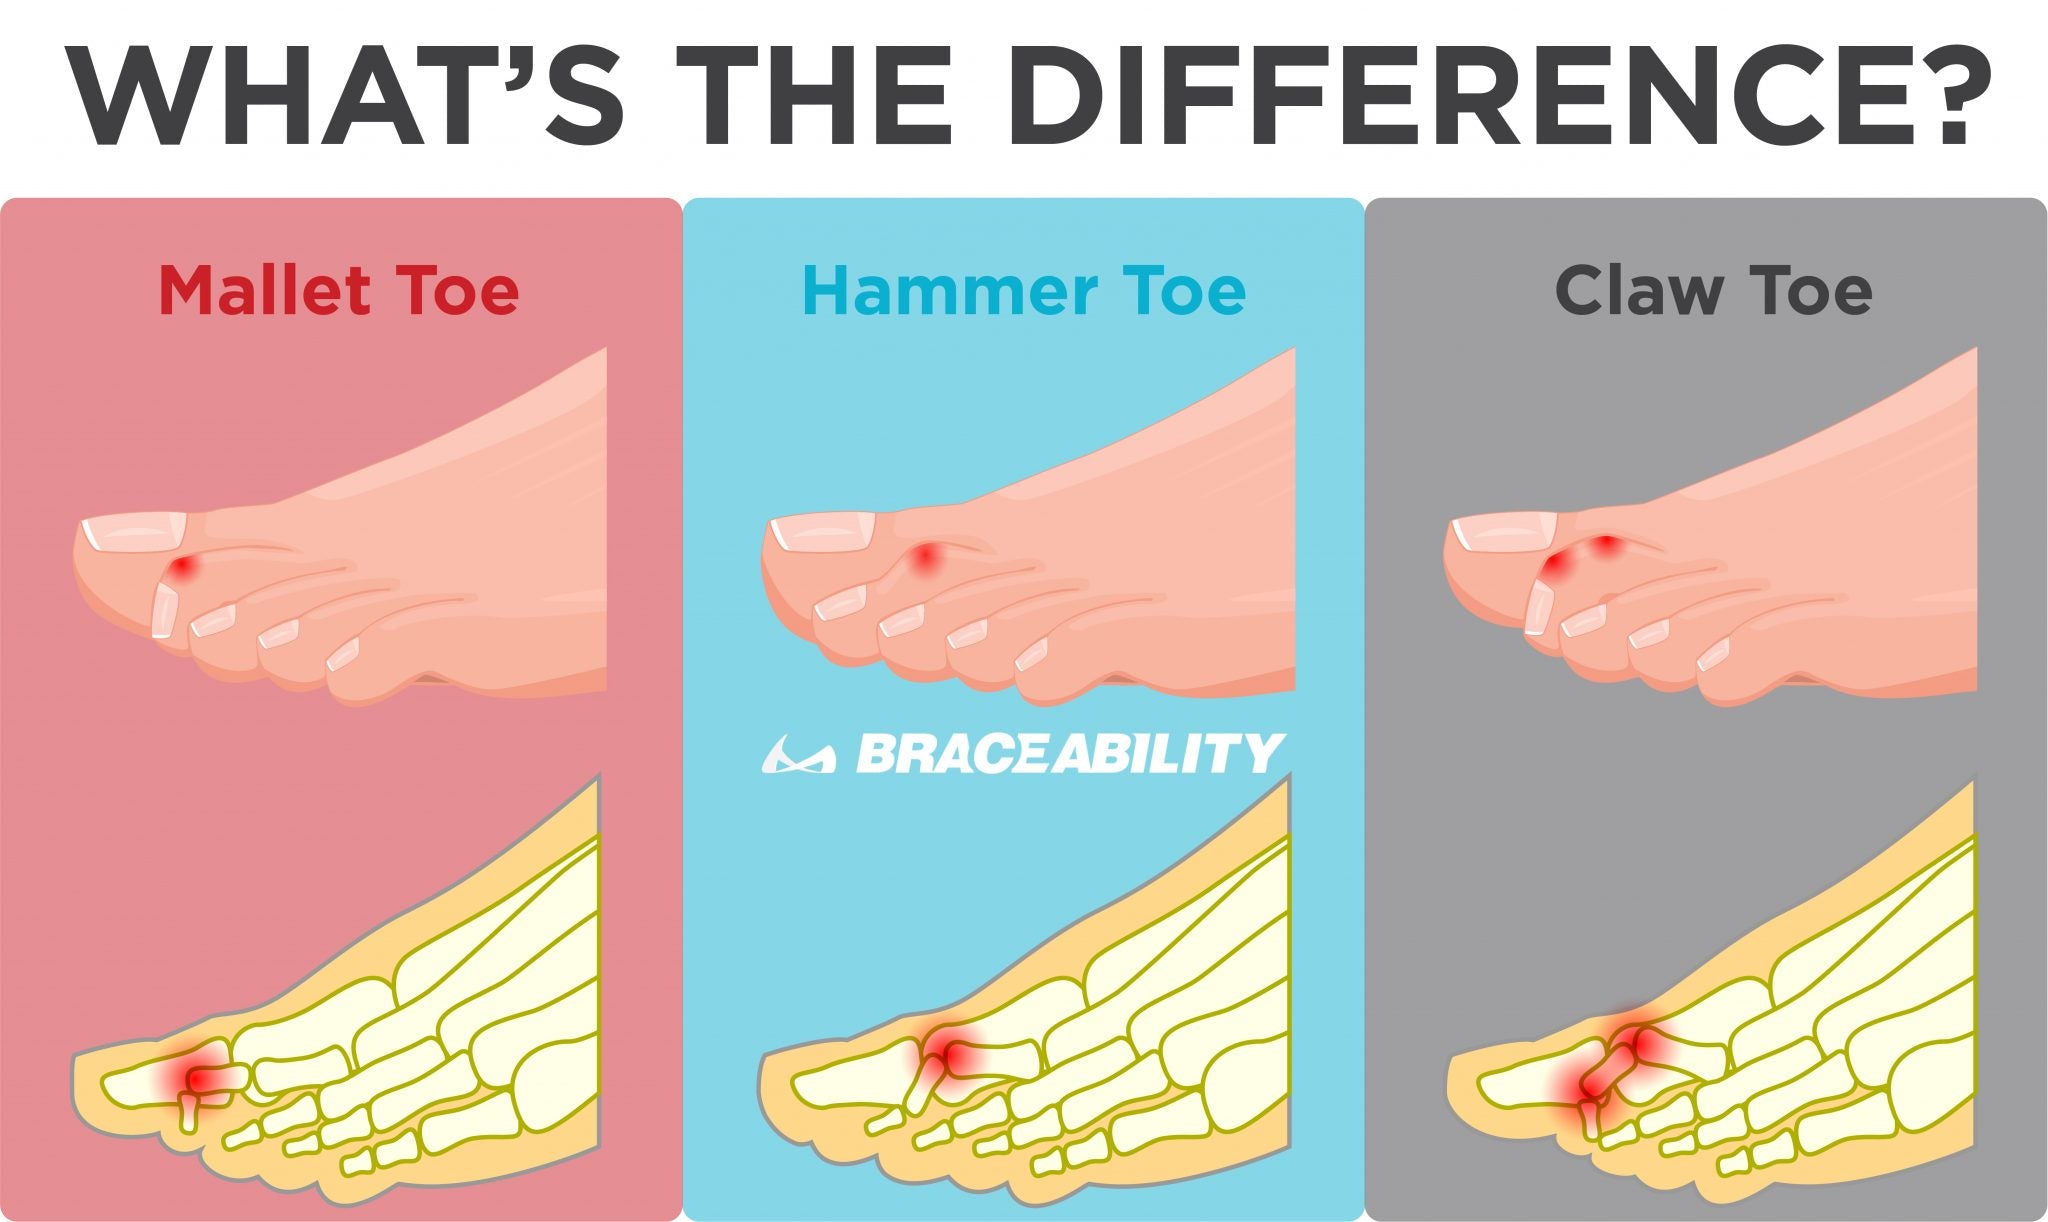 the difference between mallet toe, hammer toe and claw toe is what toe joint is injured